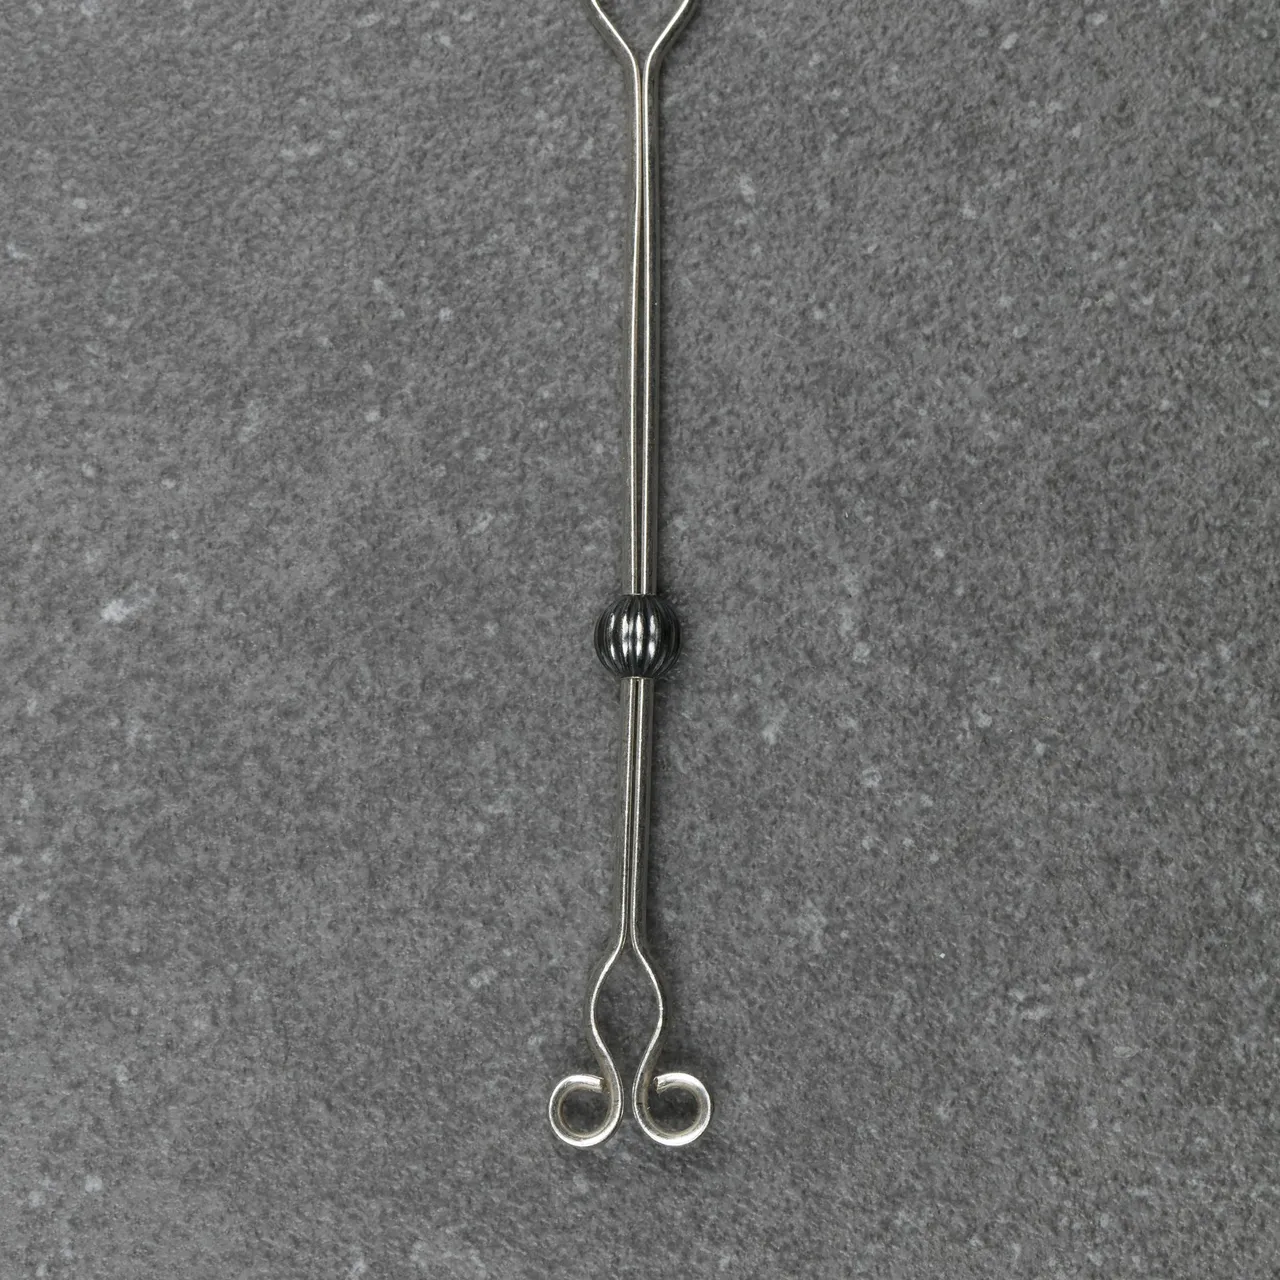 The Epicure - Artisanal Handmade Silver Roach Clip photo 4